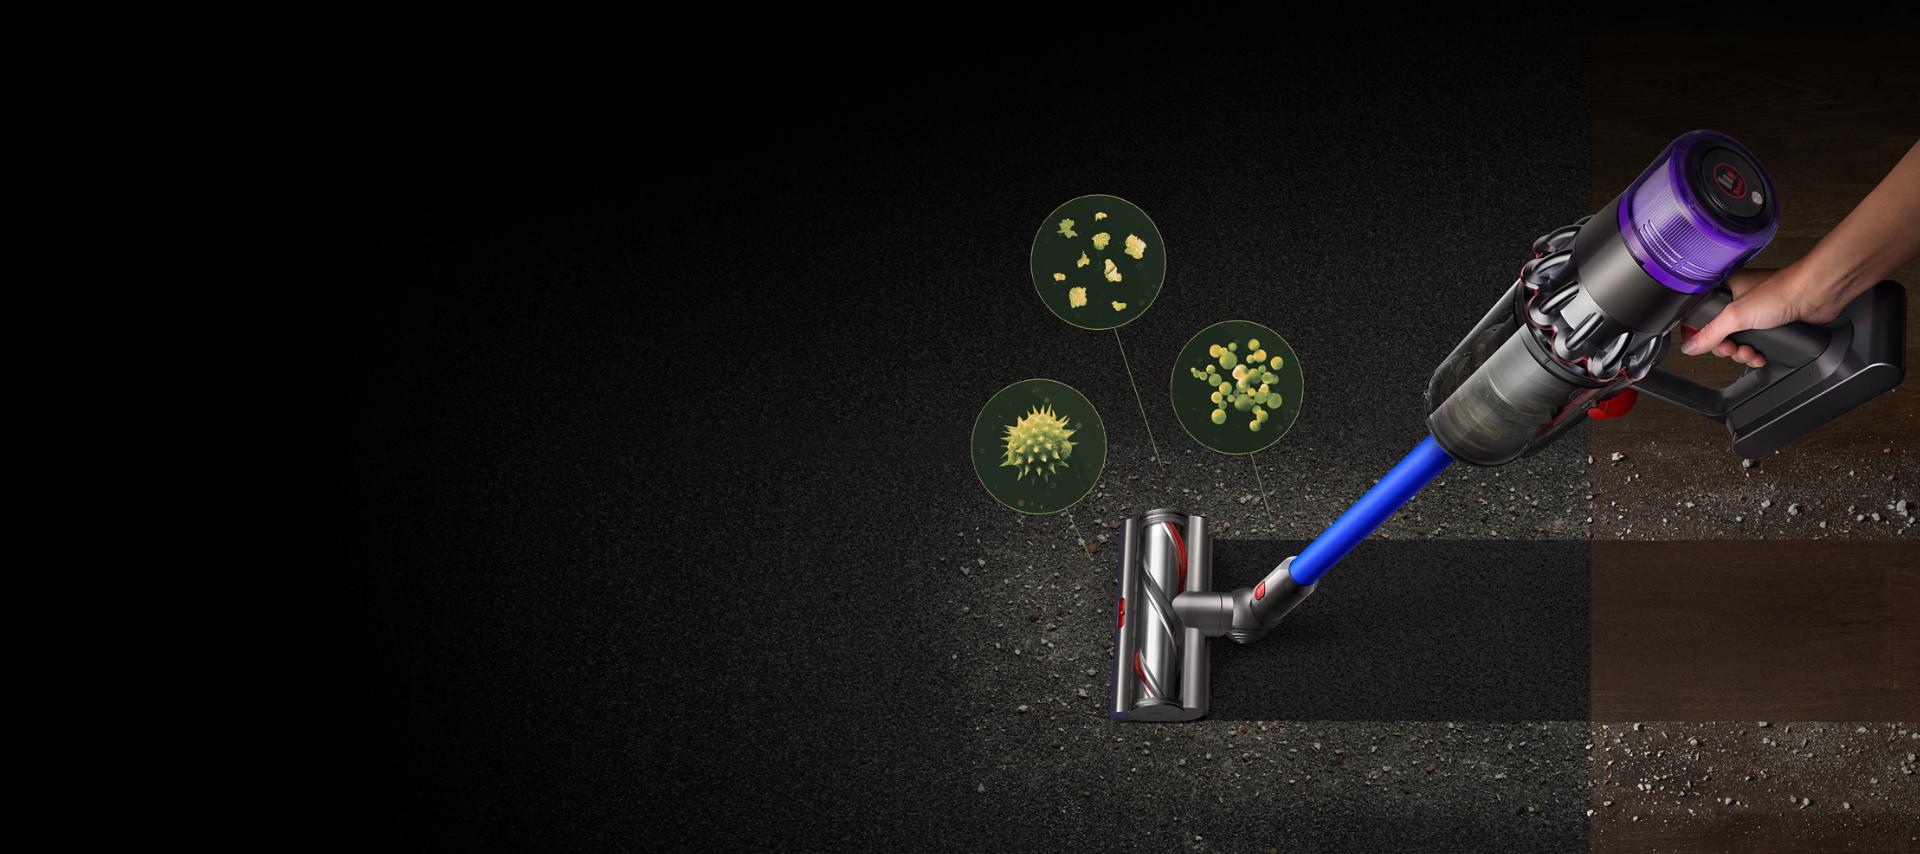 A Dyson V11™ vacuum picking up fine dust, allergens and pollen from the floor.